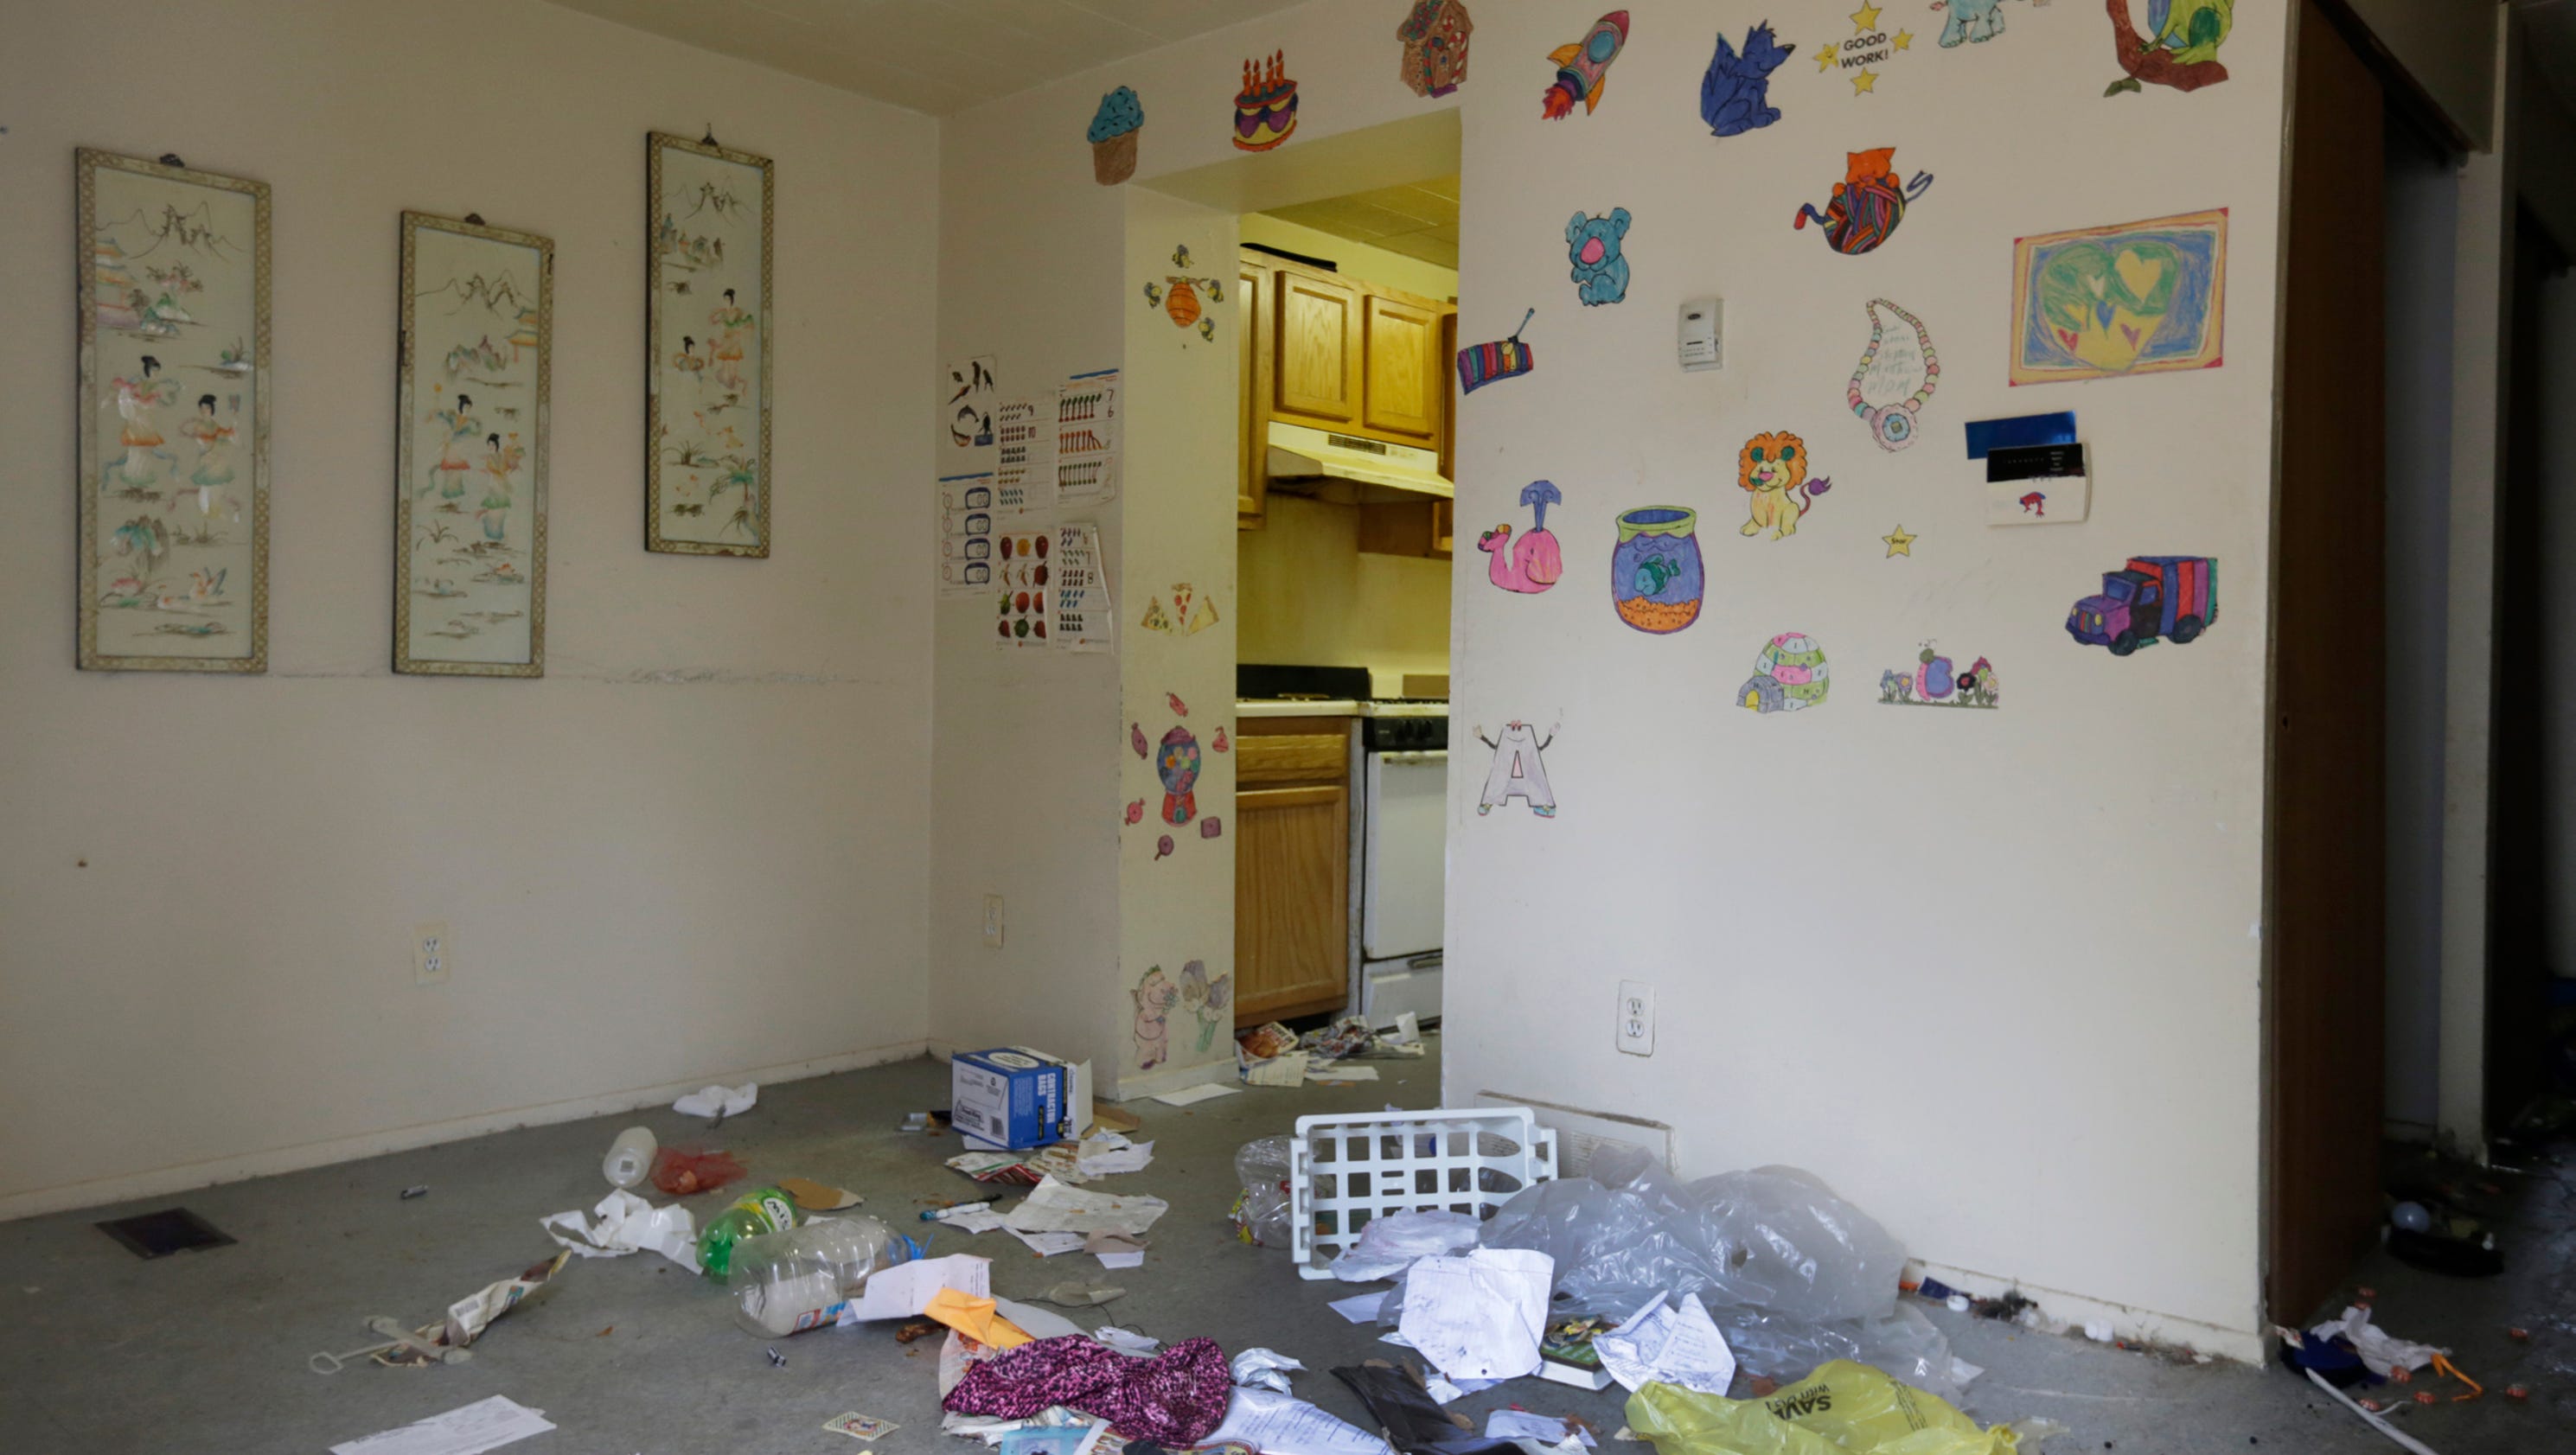 Eviction crew empties home of kids found in freezer